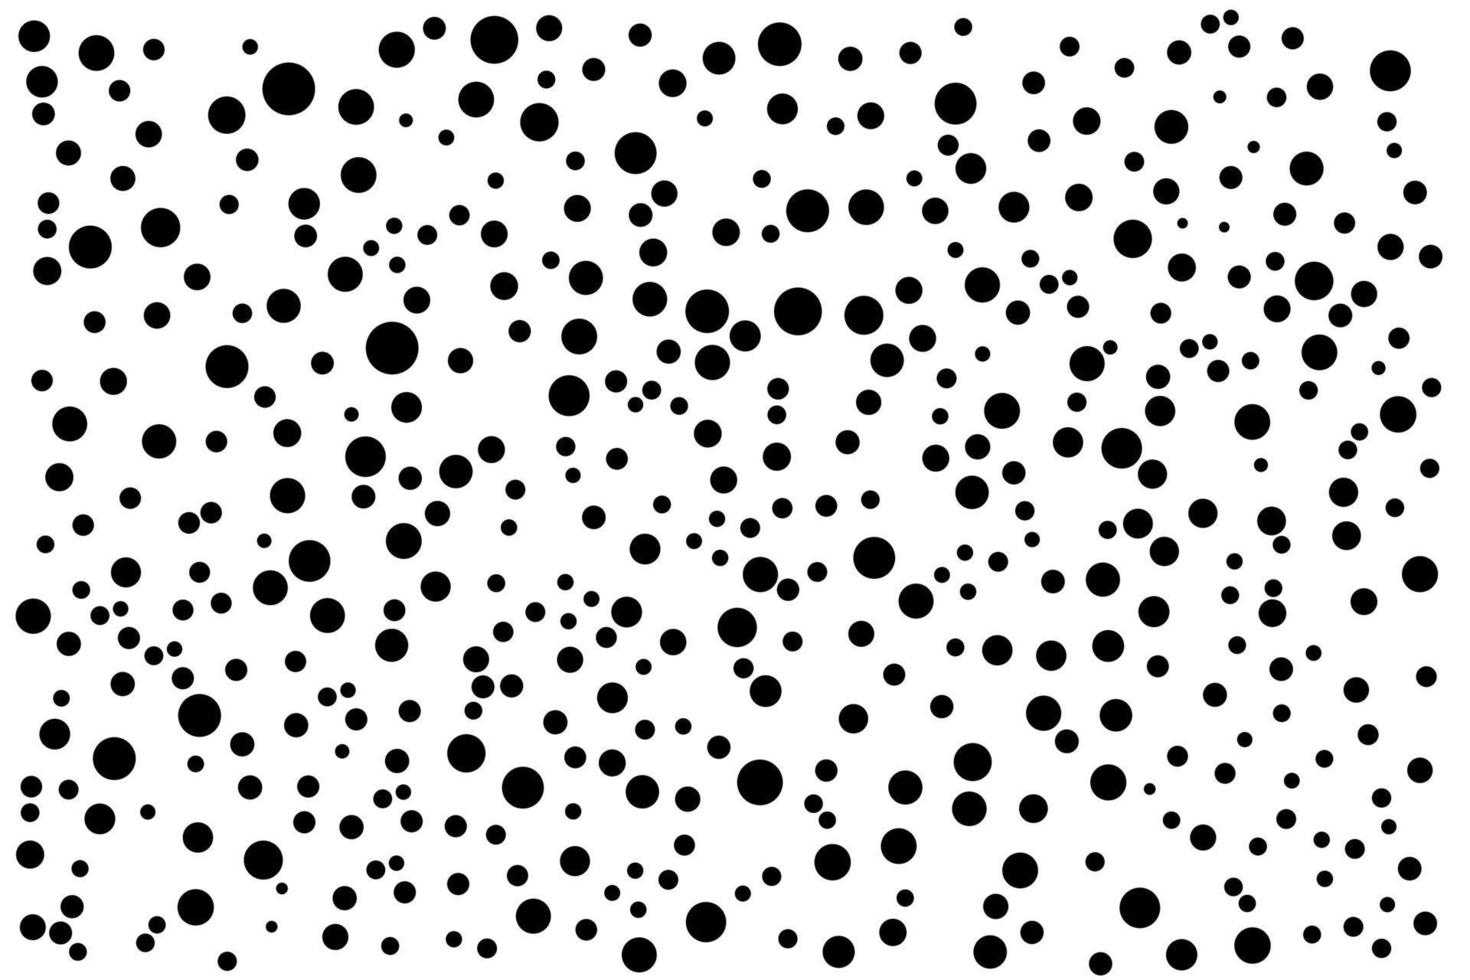 pattern of black dots of different sizes on a white background vector